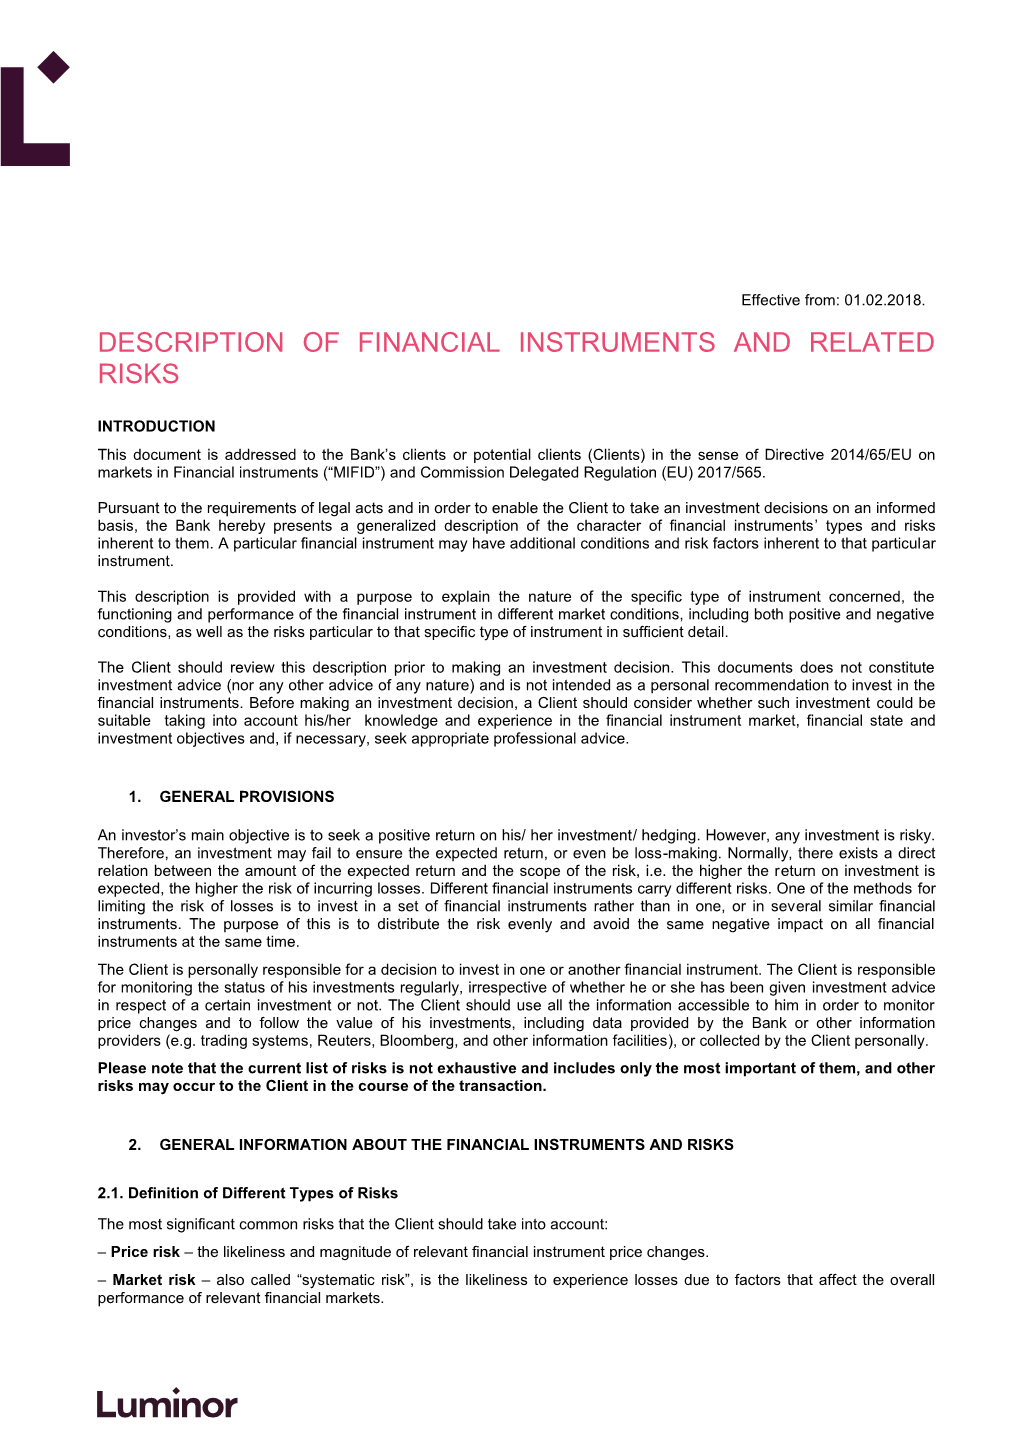 Description of Financial Instruments and Related Risks